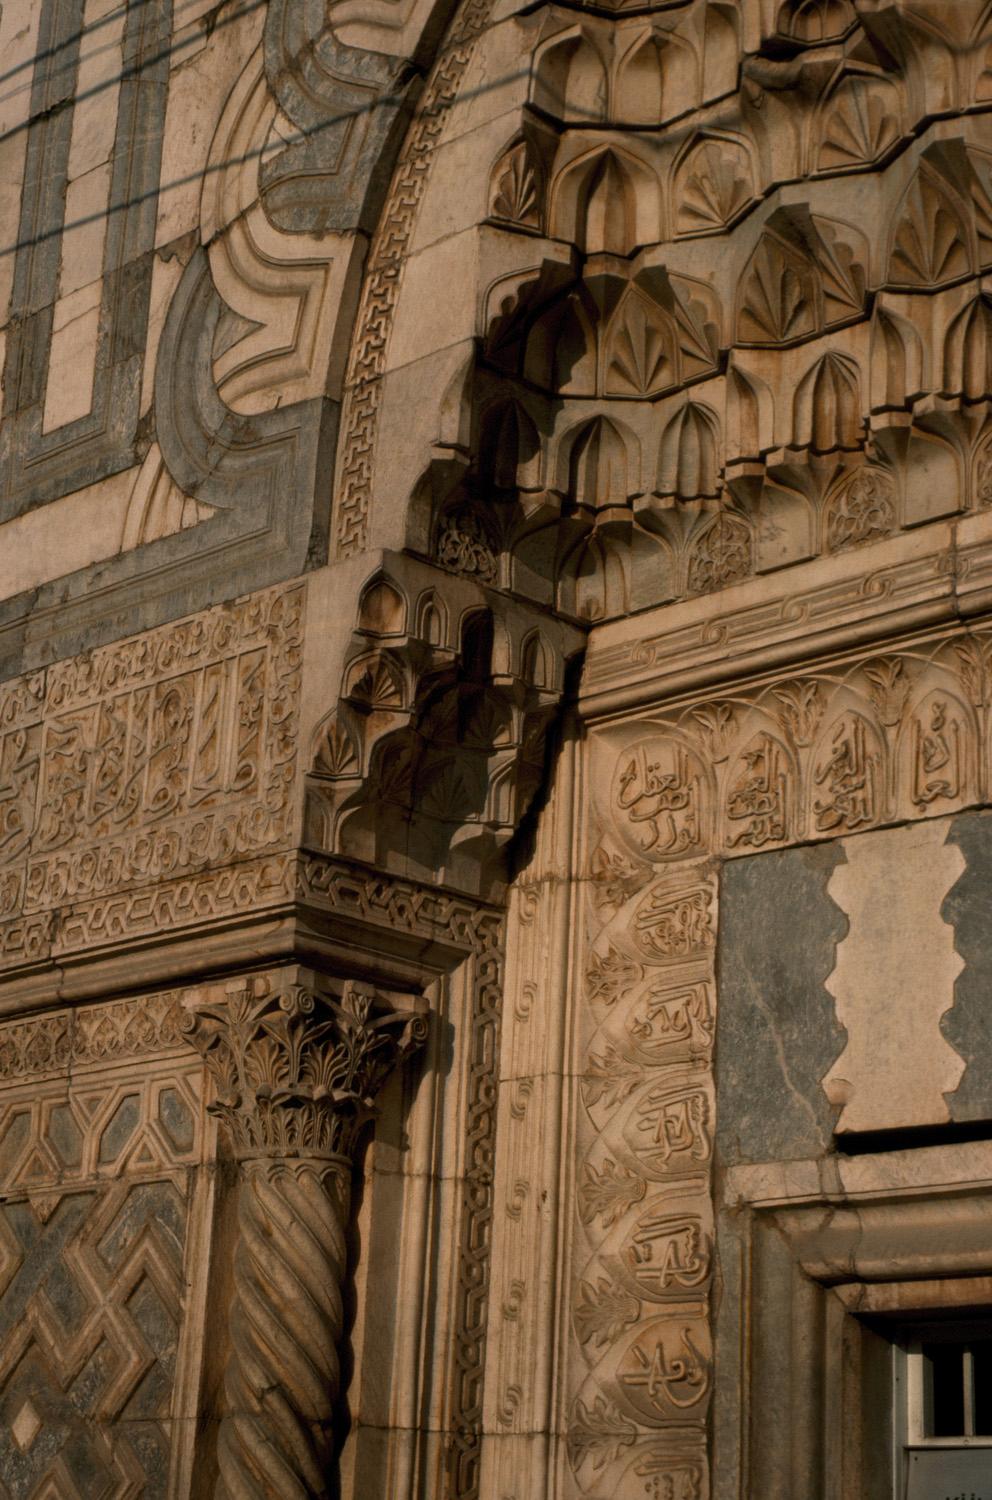 Detail showing muqarnas carving and polychrome joggled voissours